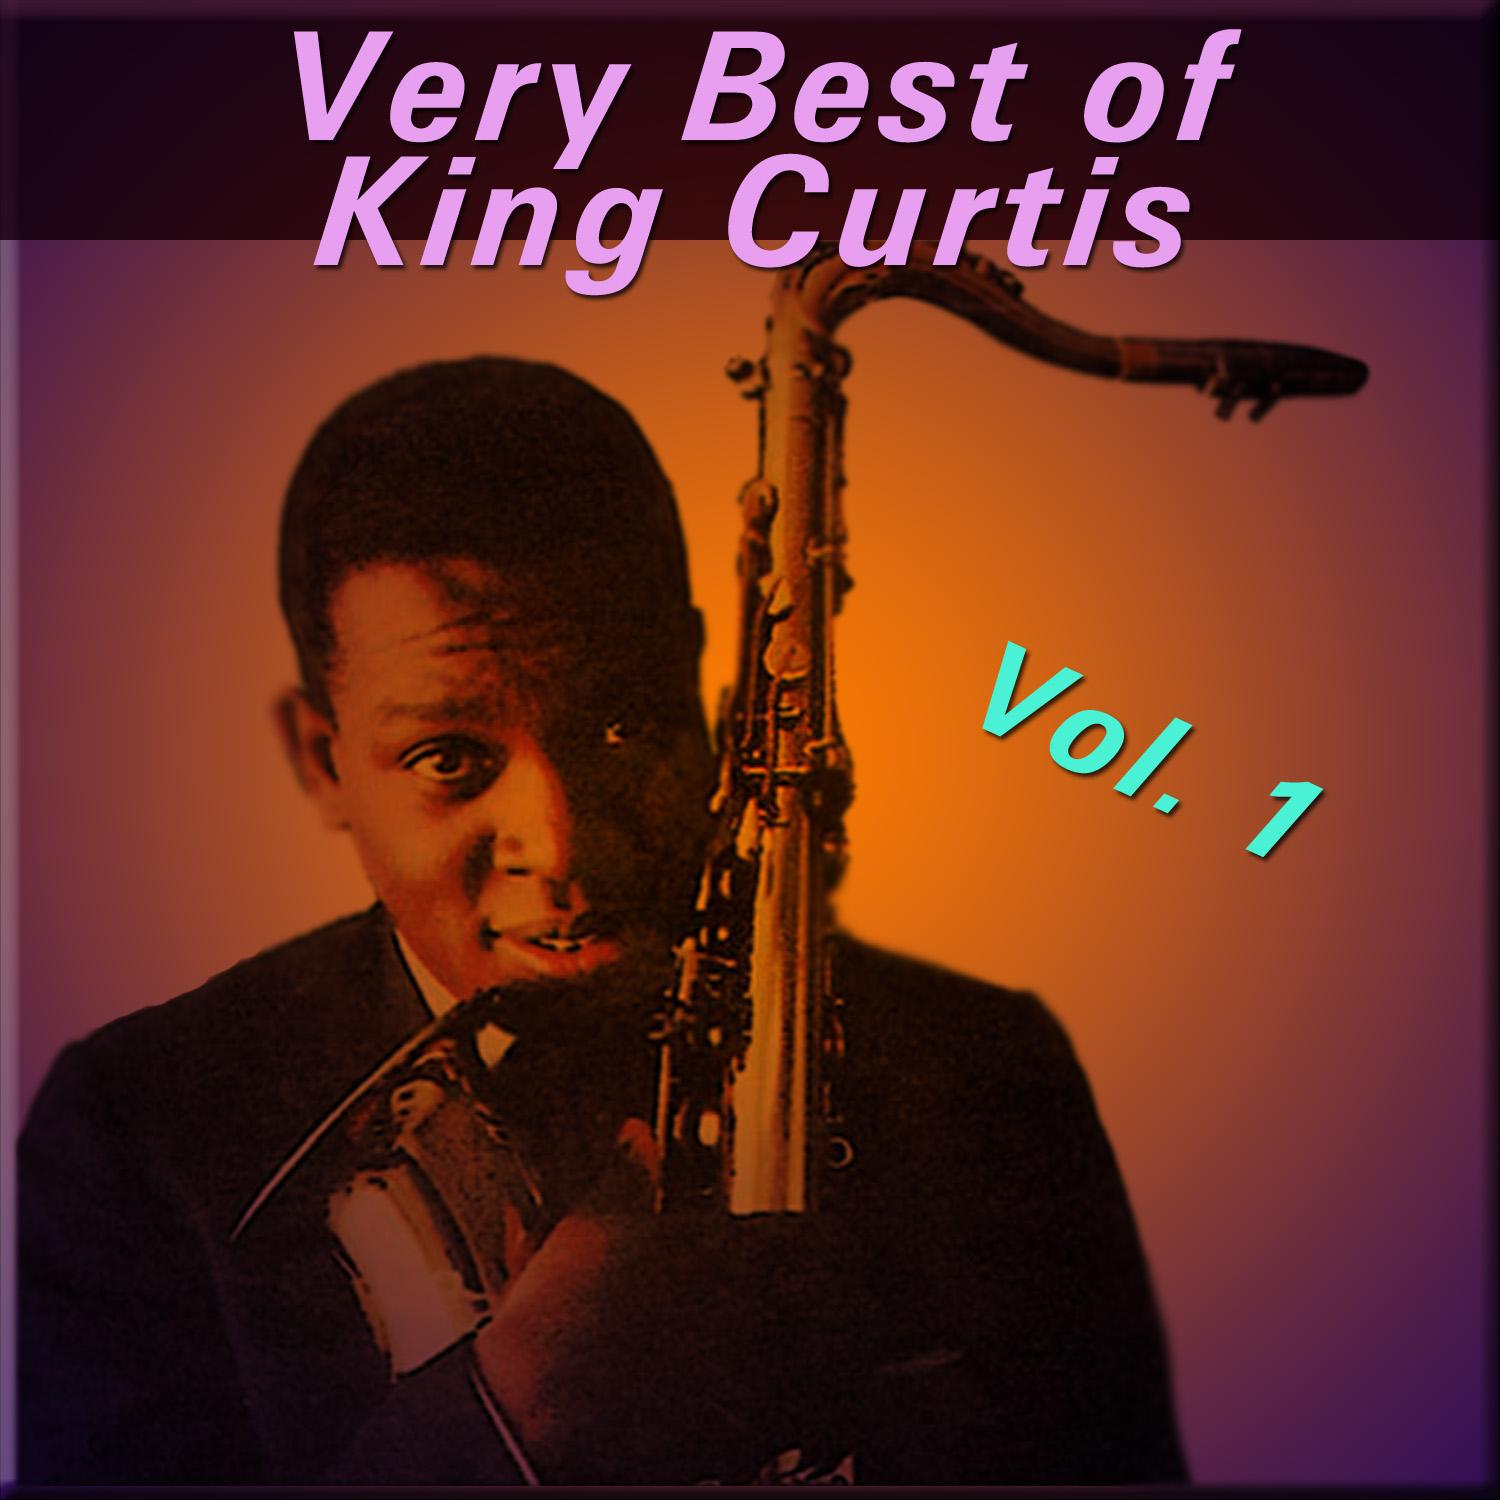 Very Best of King Curtis, Vol. 1